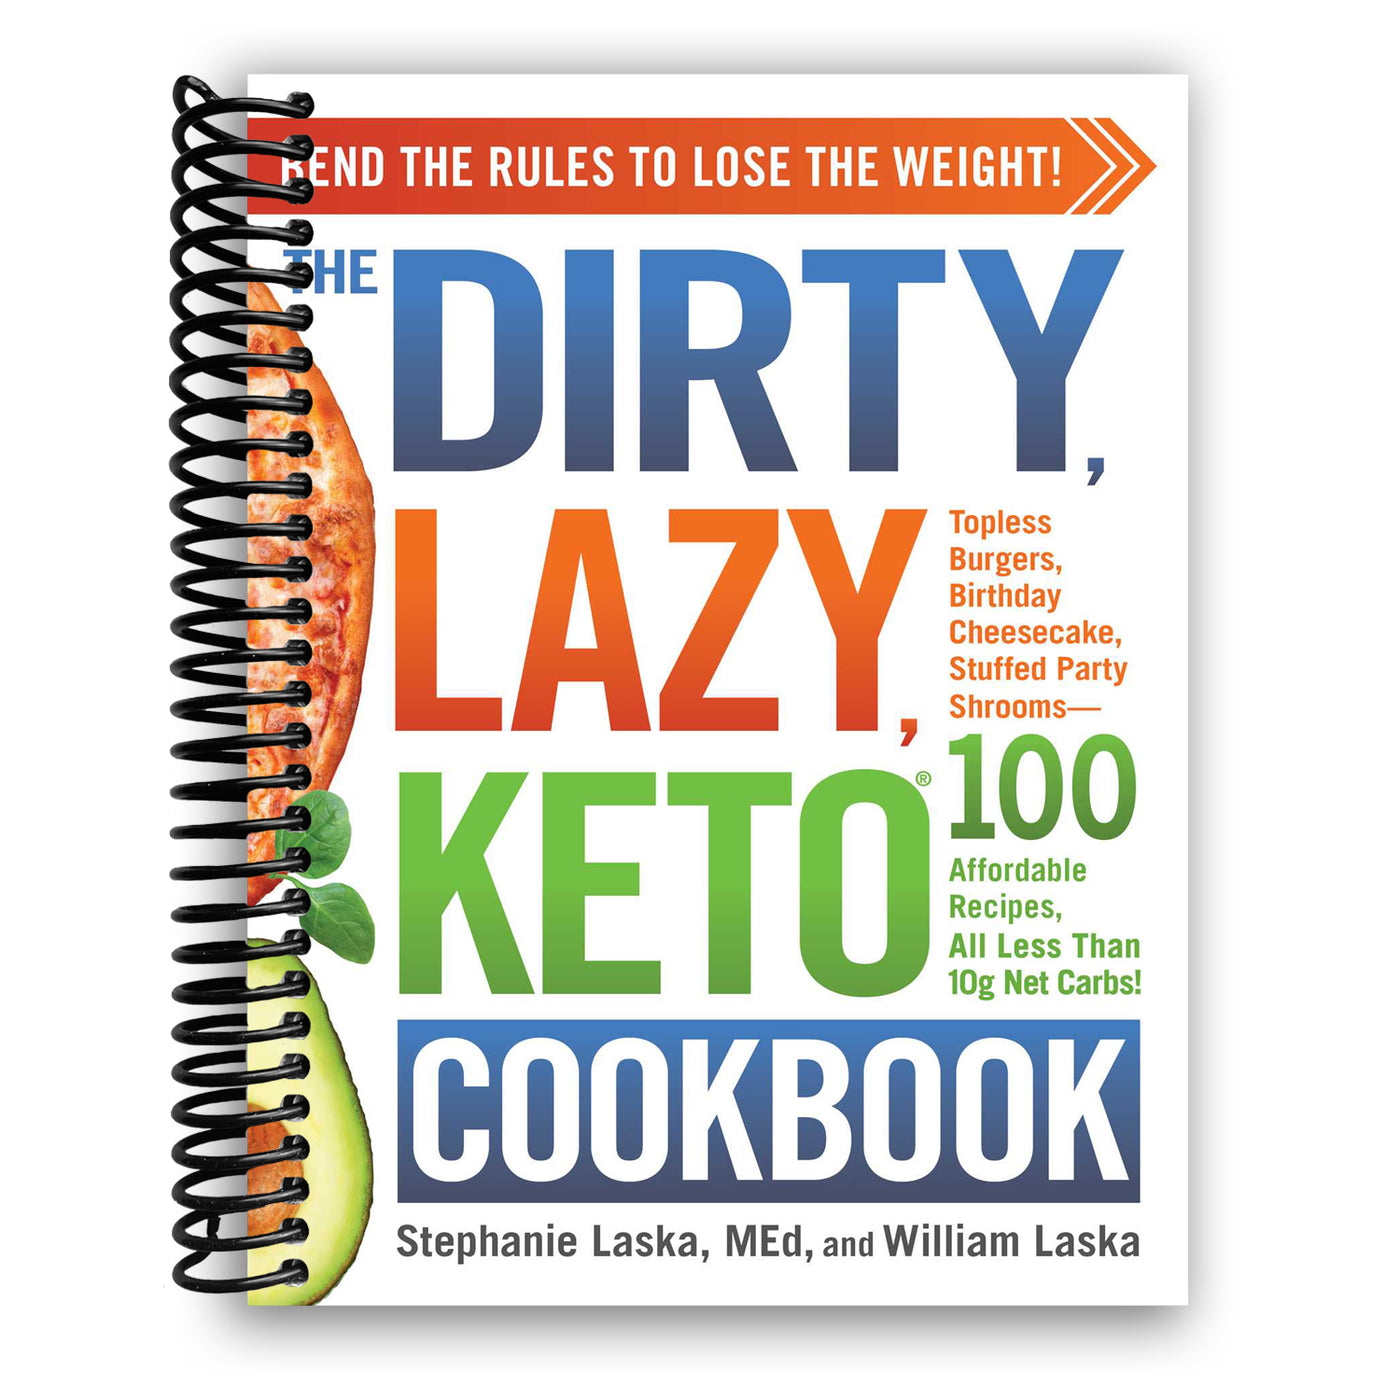 The DIRTY, LAZY, KETO Cookbook: Bend the Rules to Lose the Weight! (Spiral Bound)